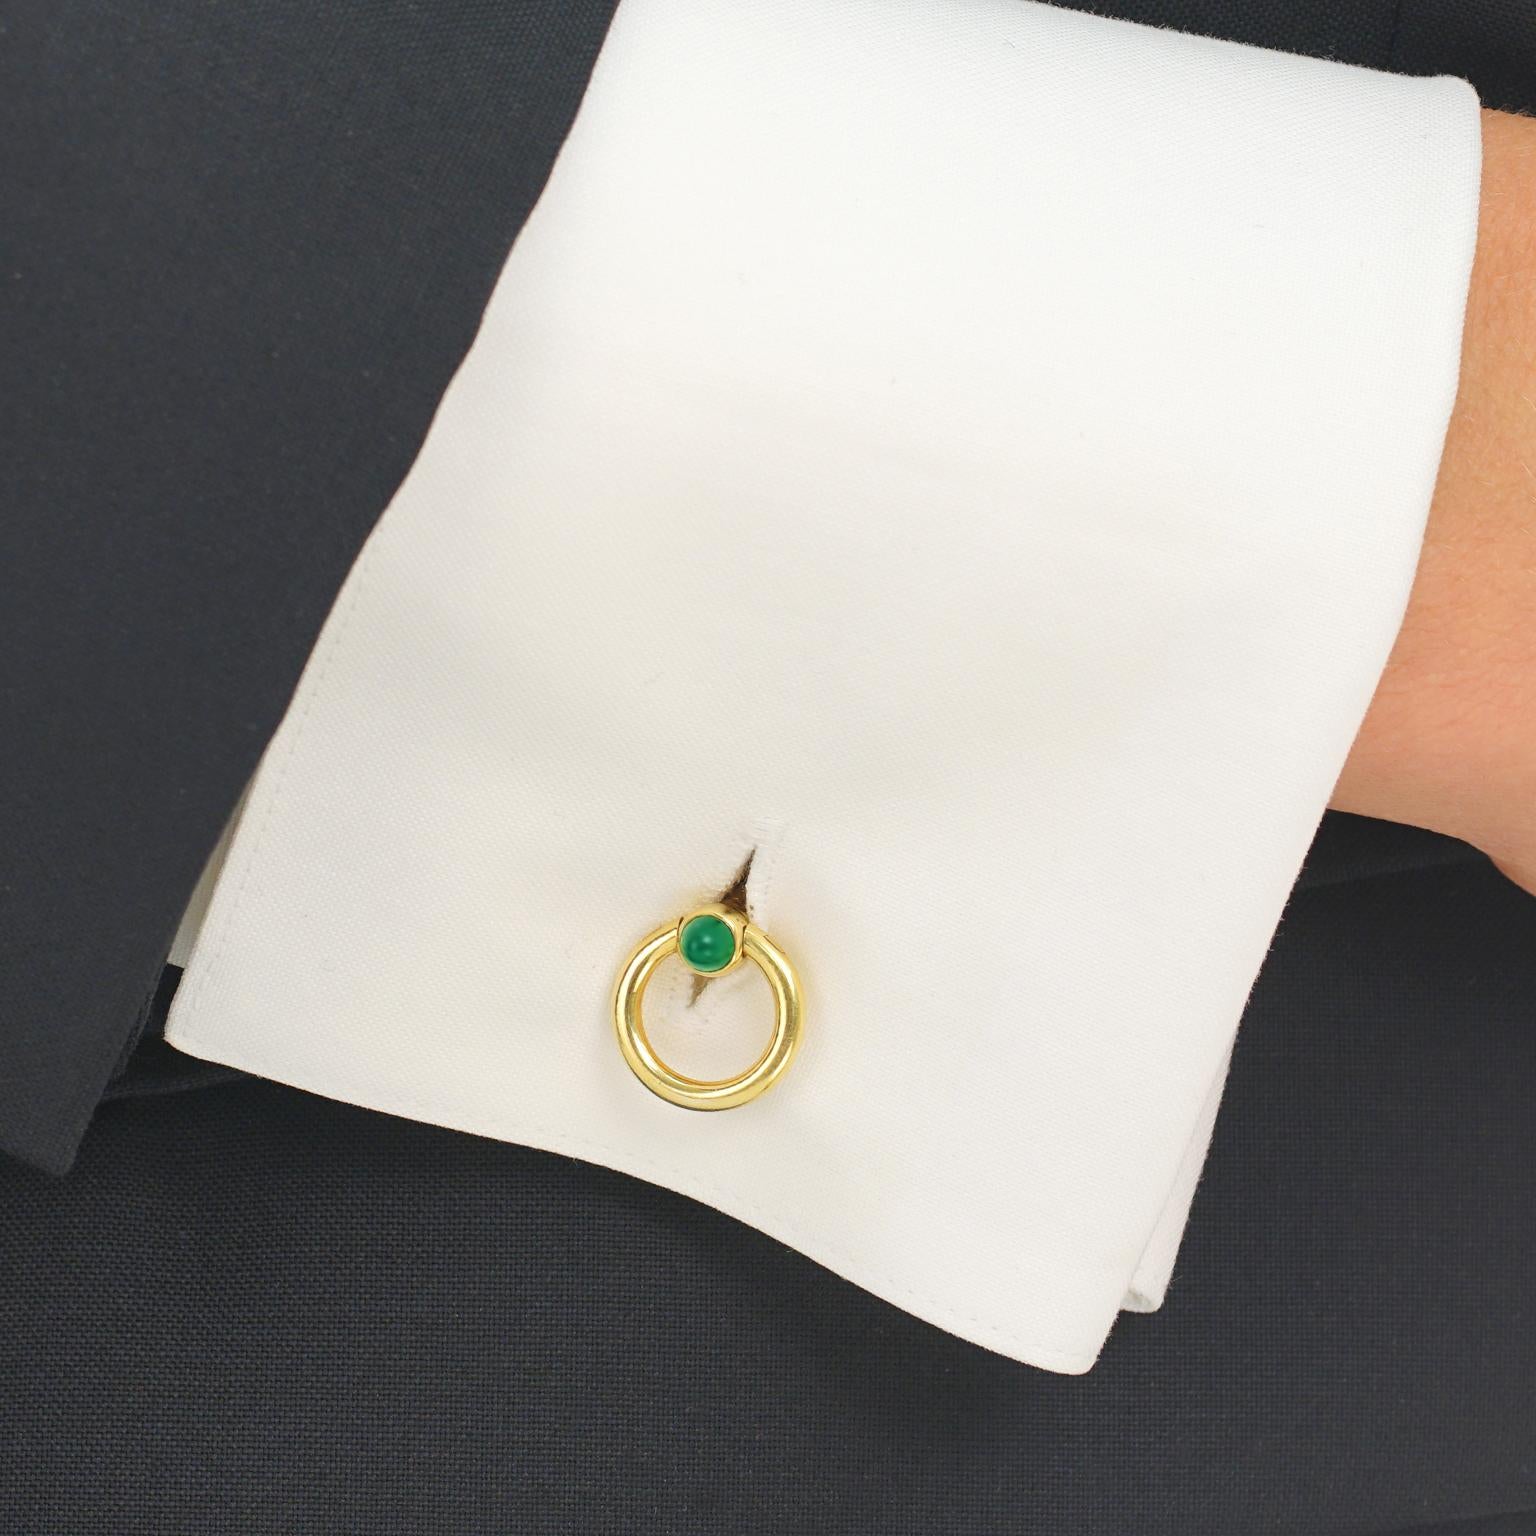 Circa 1950s, 14k, Cartier, New York. Urbane, cosmopolitan, refined, understated -- words that come to mind when I think of Cartier. These 14k yellow gold fifties cufflinks have that distinctive Cartier New York look. The Chrysoprase cabochons add a